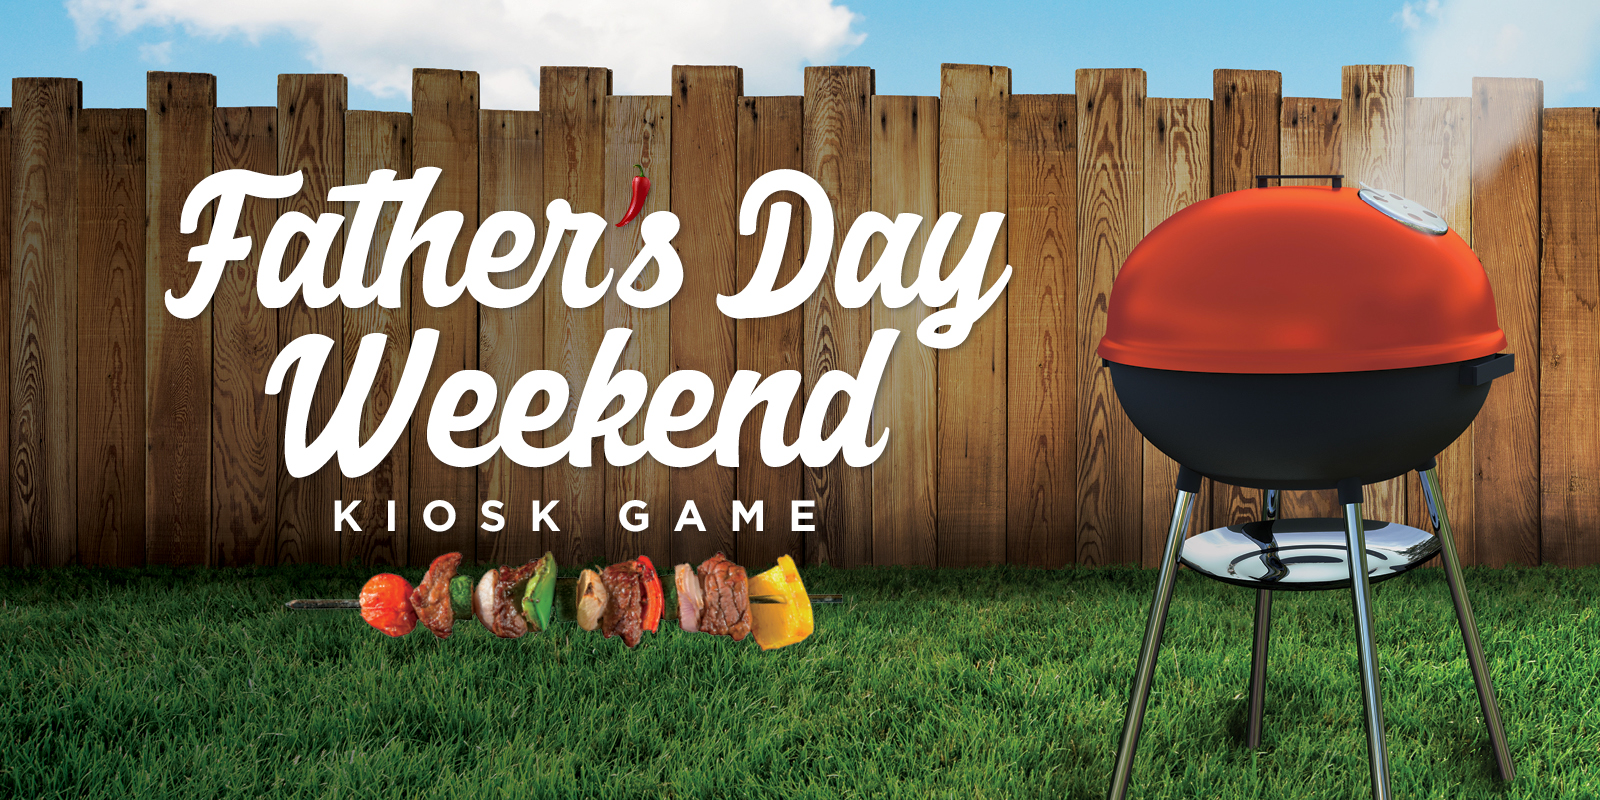 Father's Day weekend kiosk game - creative has barbecue grill on it